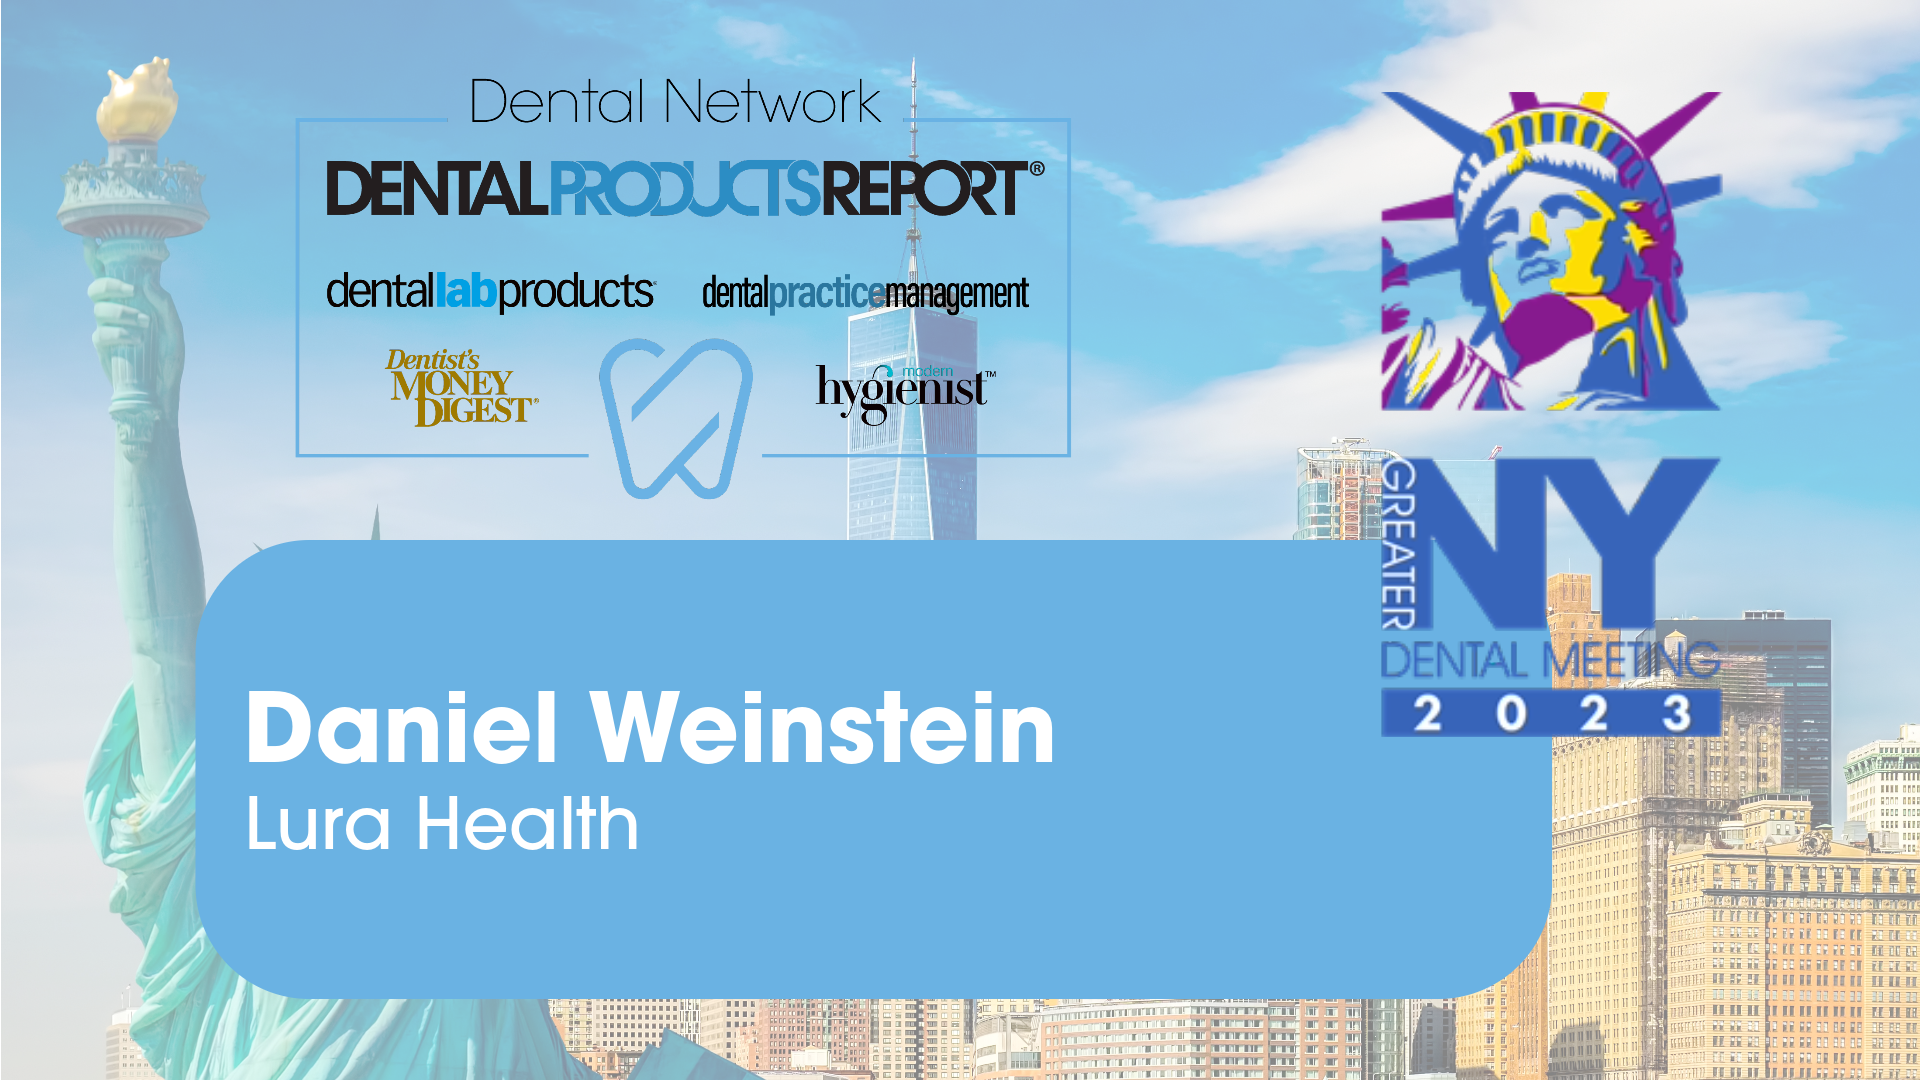 Greater New York Dental Meeting 2023 – Interview with Daniel Weinstein from Lura Health